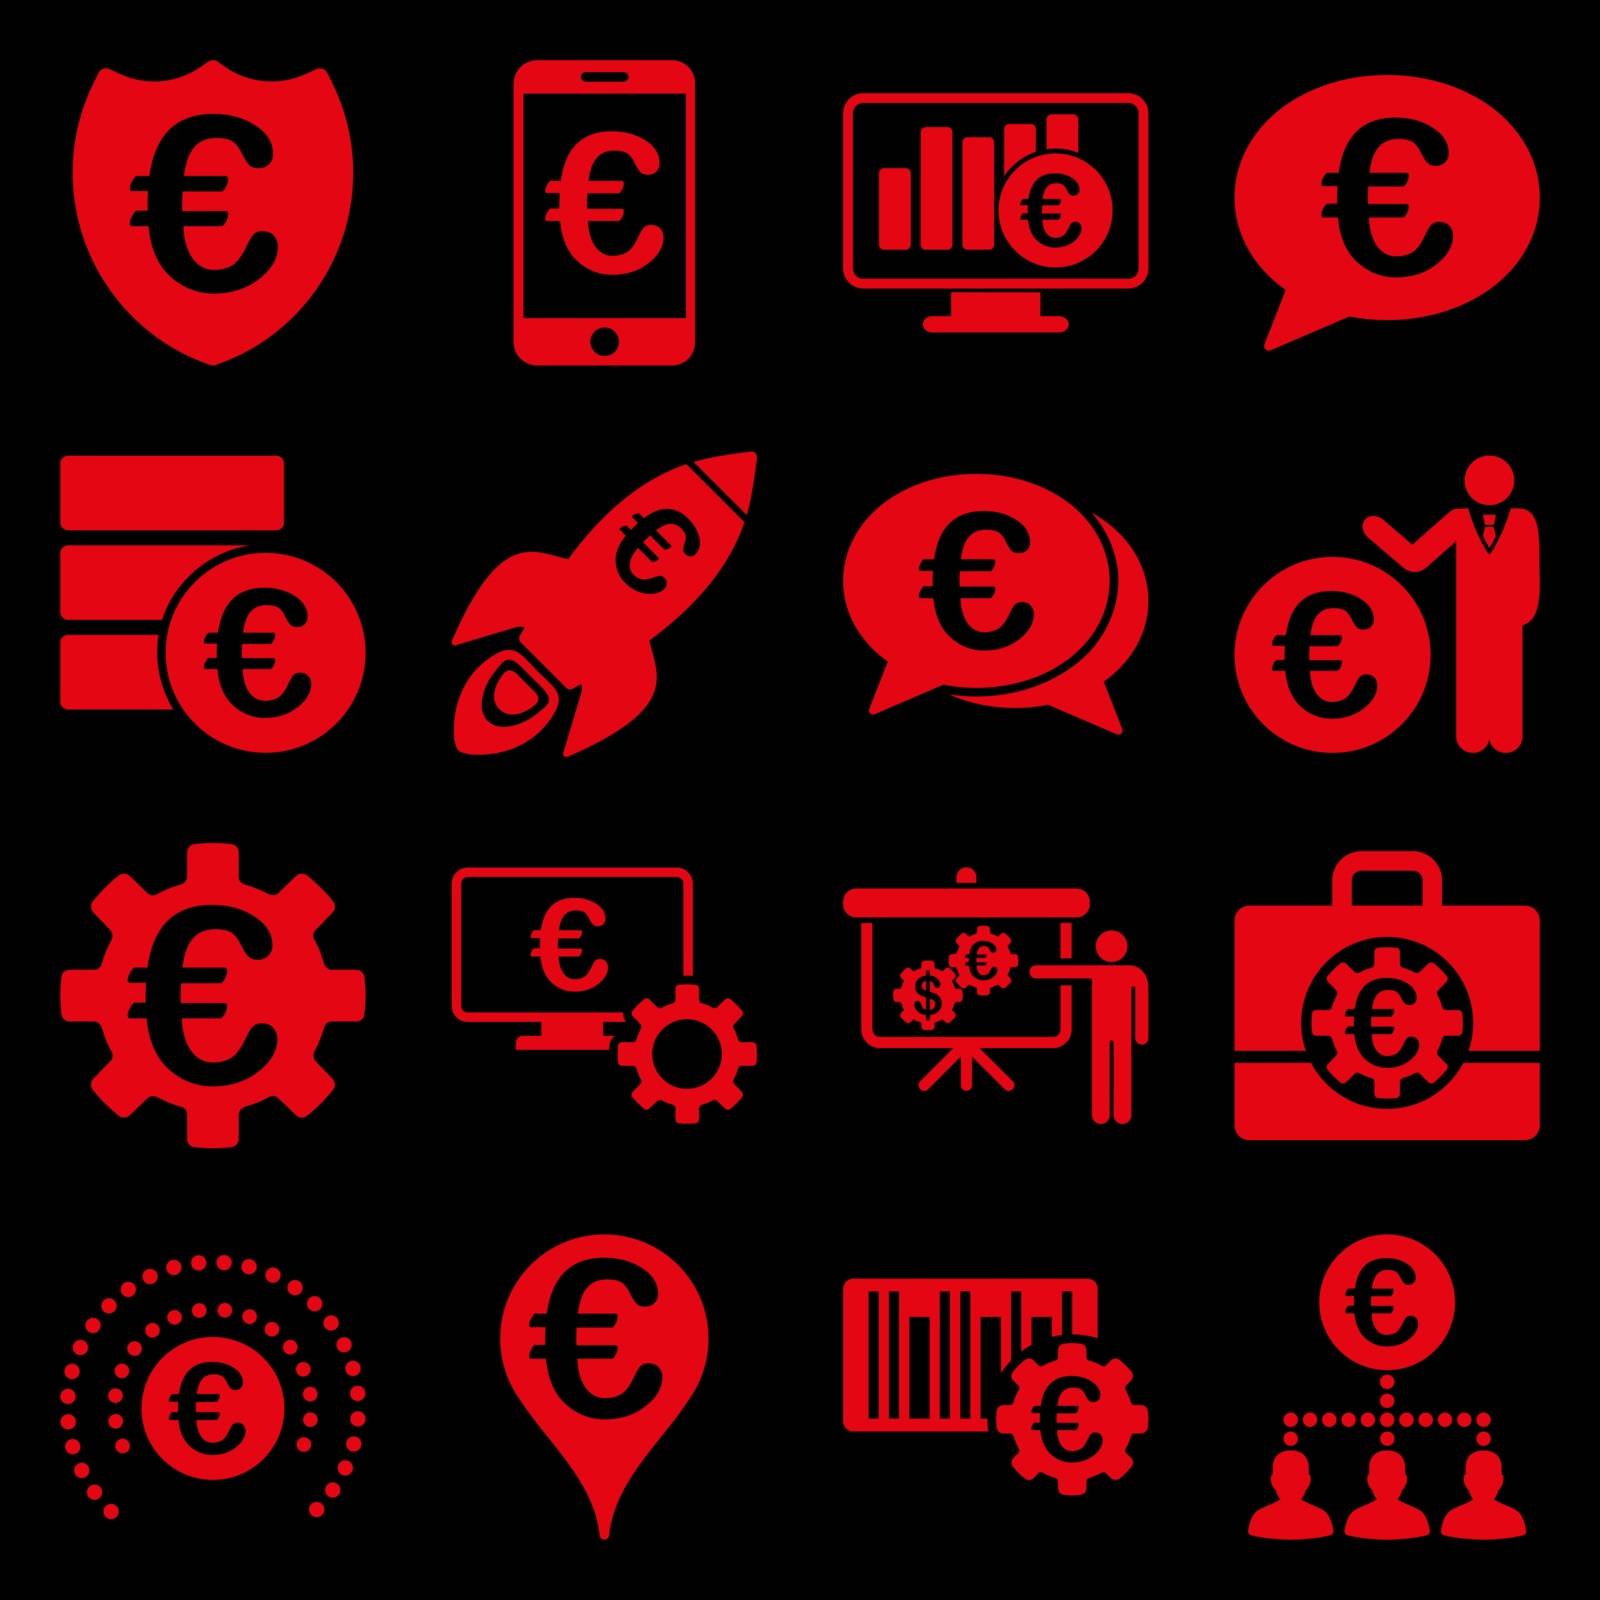 Euro banking business and service tools icons. These flat icons use red color. Images are isolated on a black background. Angles are rounded.